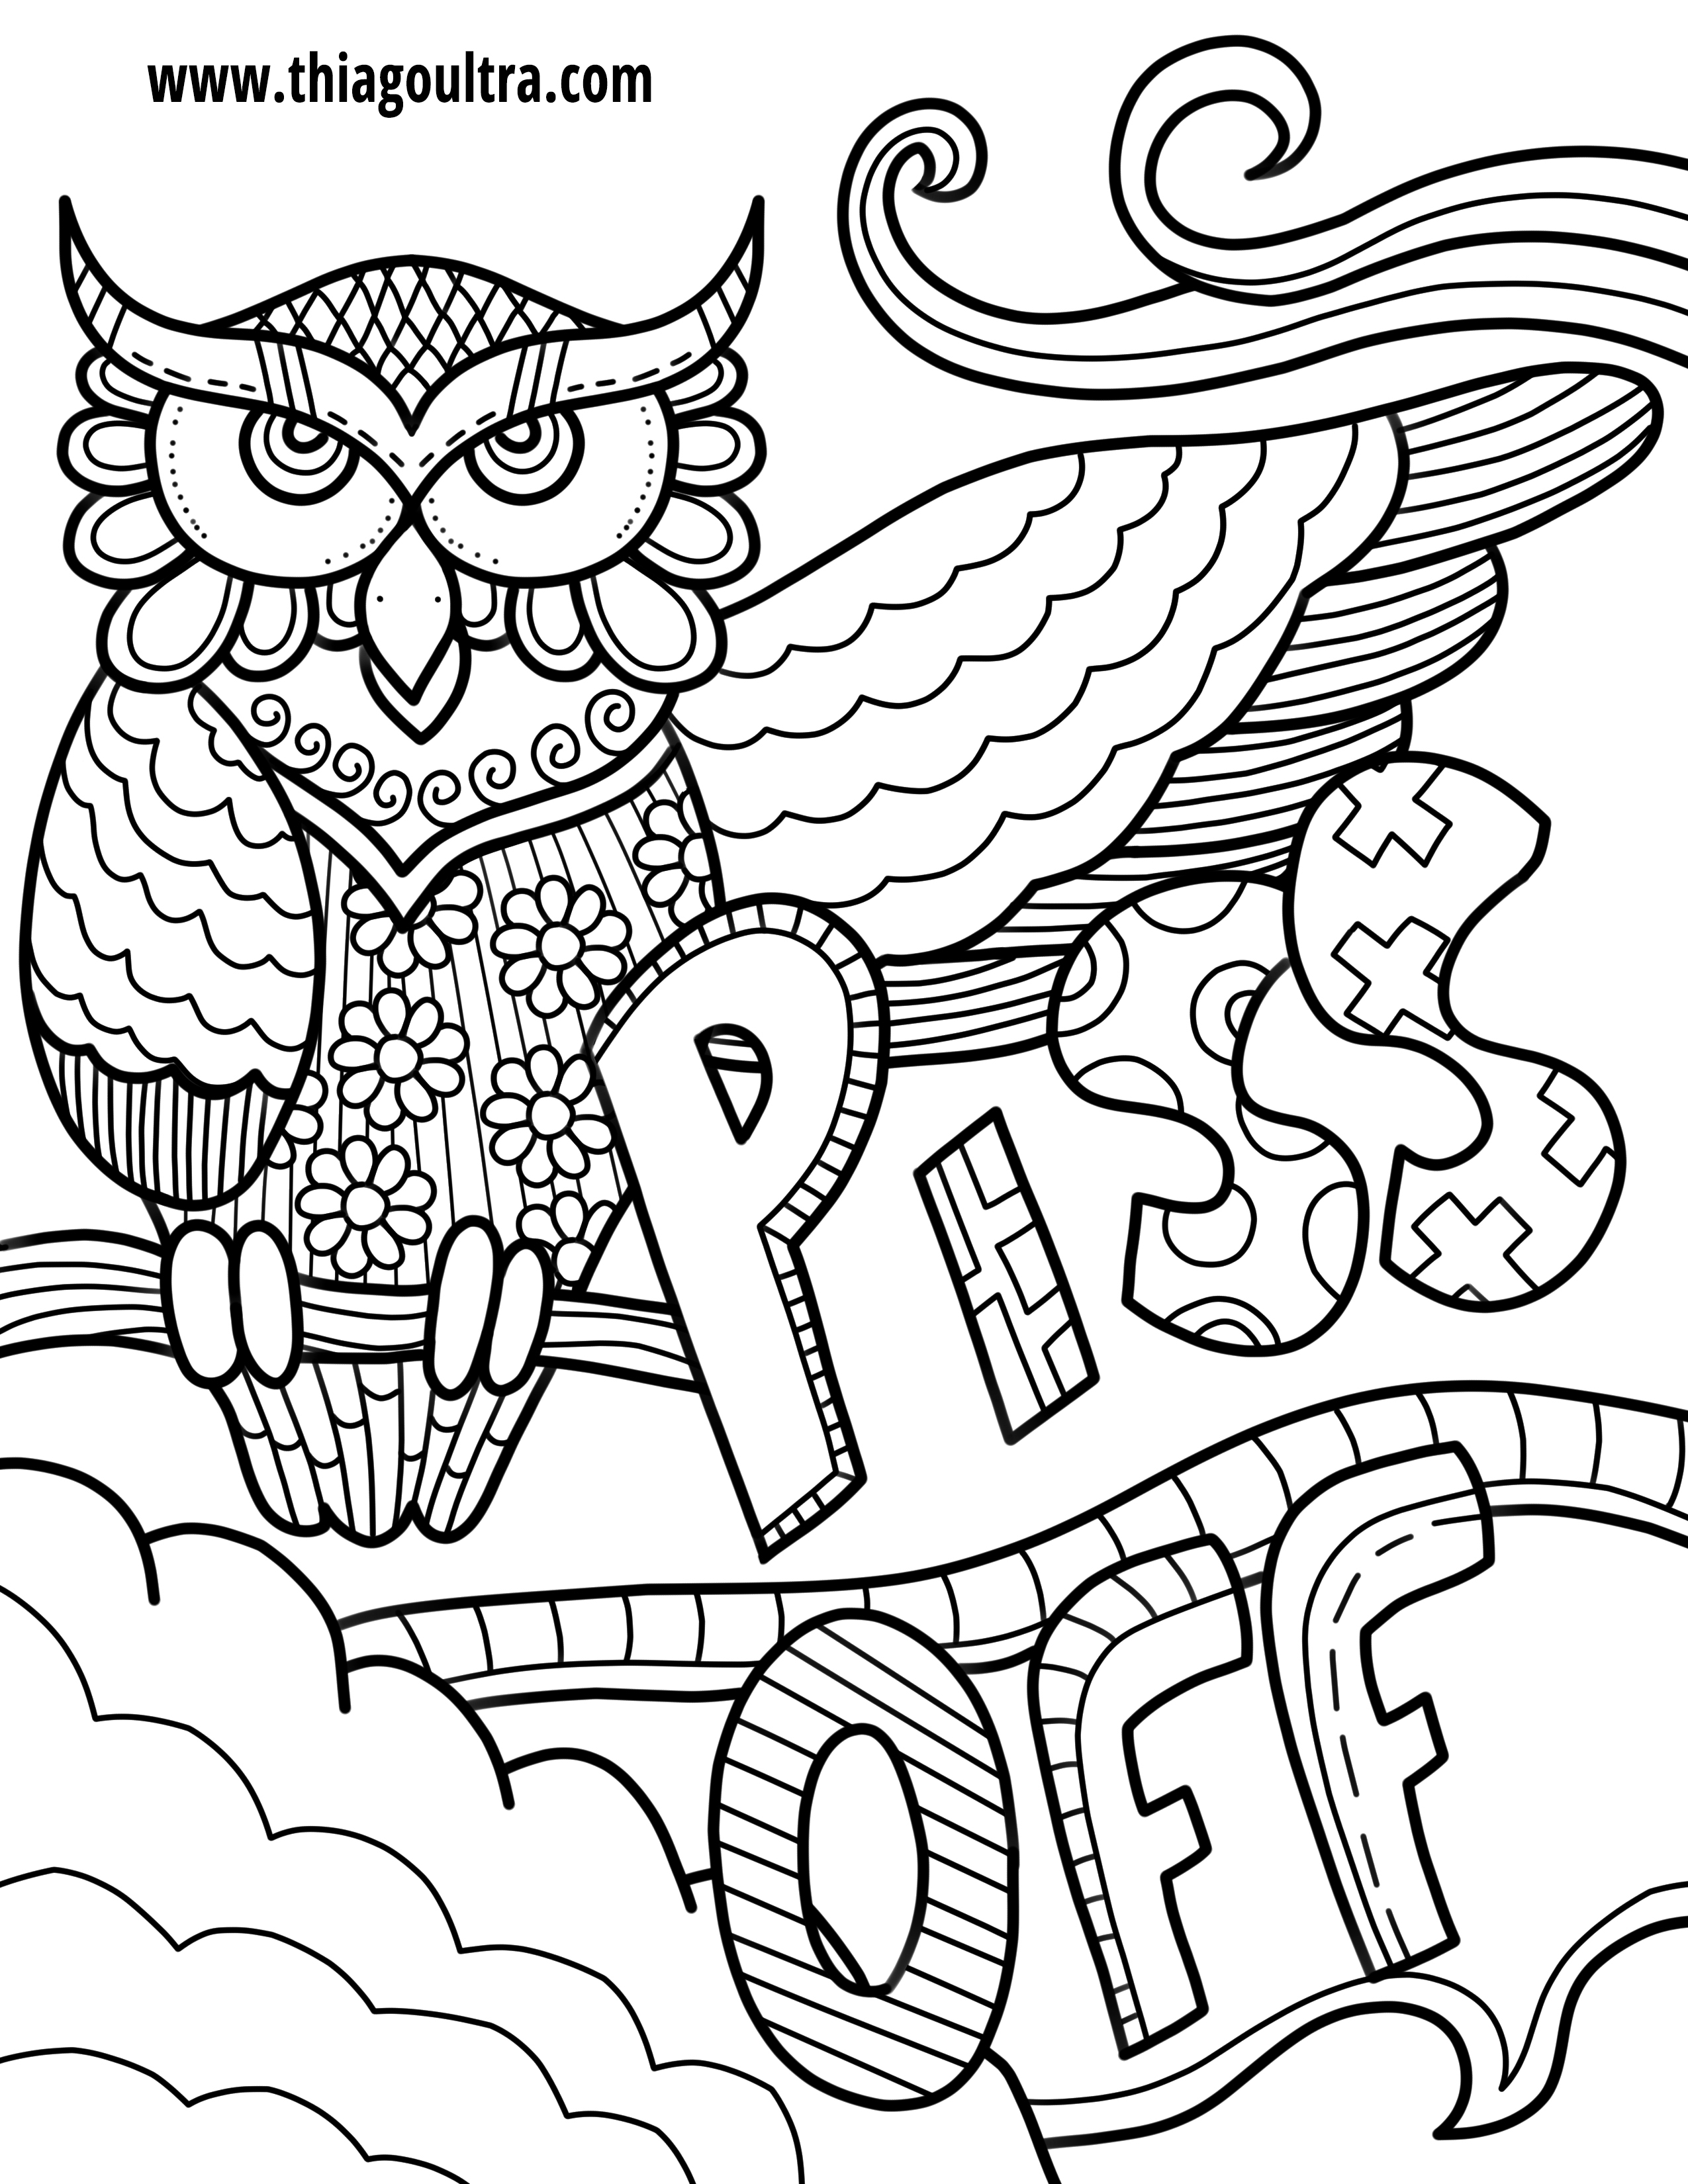 Free Printable Coloring Pages For Adults Pdf at